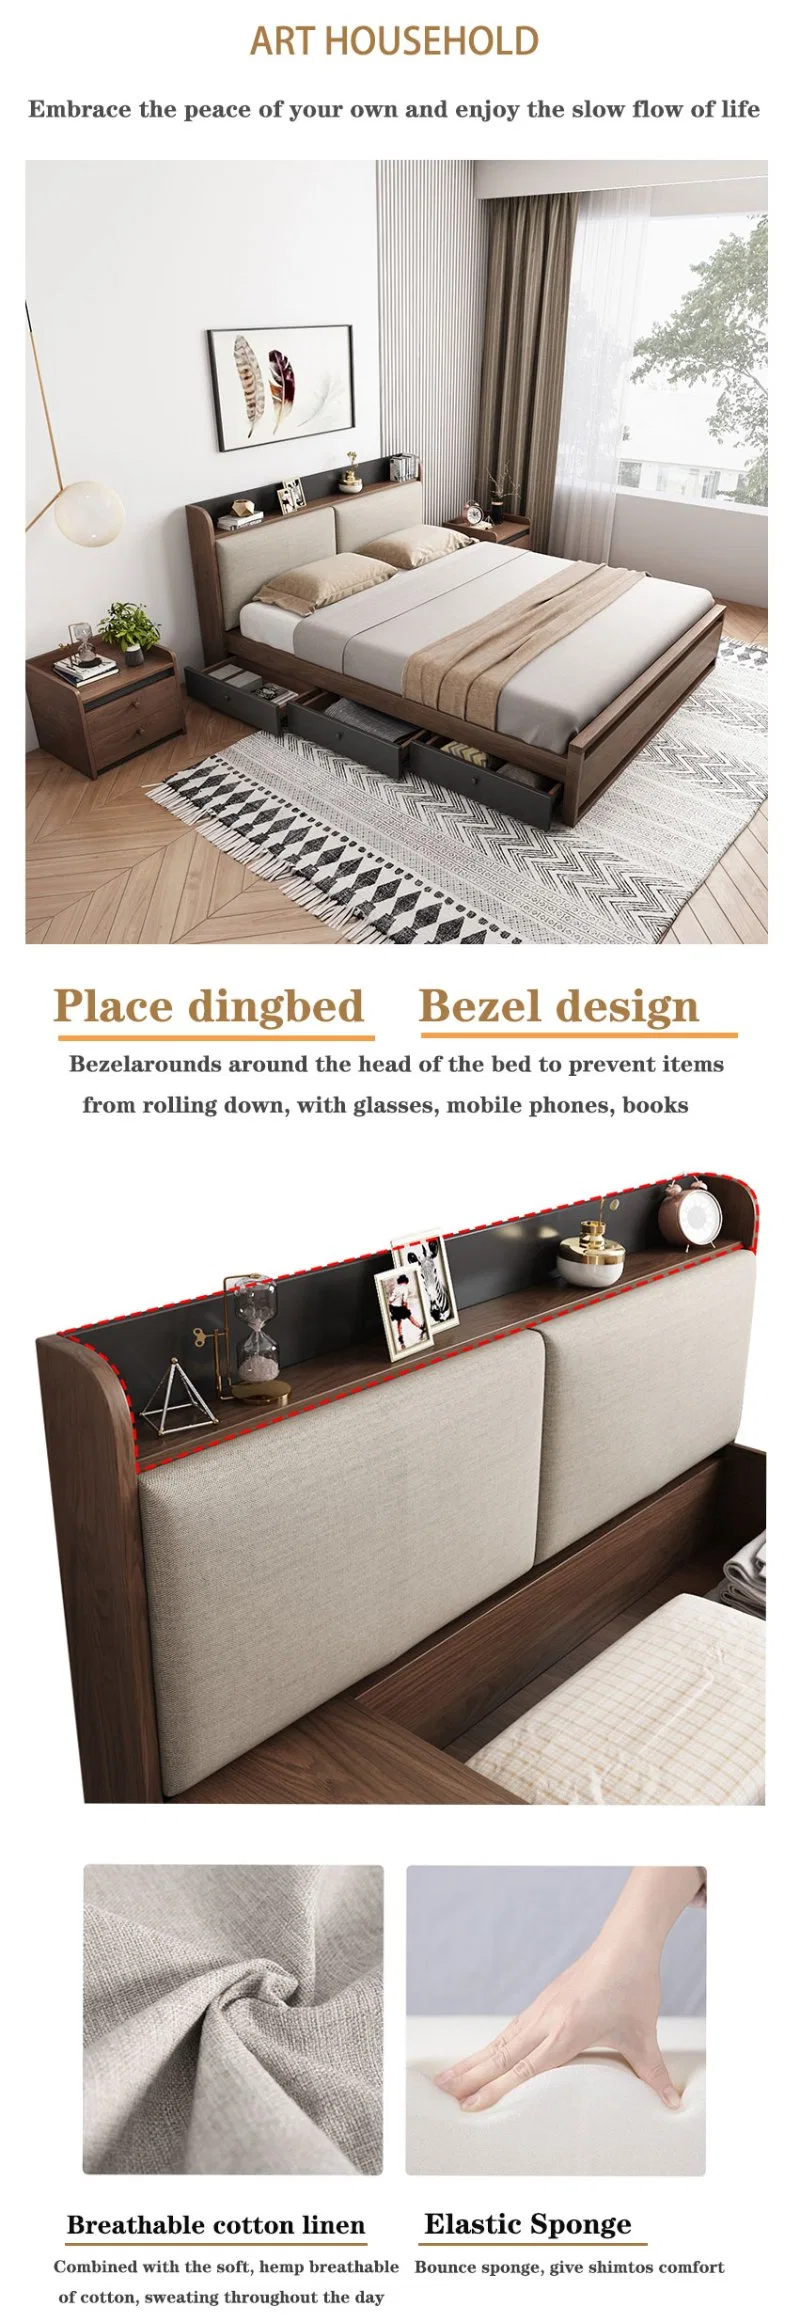 Chinese Wholesale Office Sofa Apartment Kitchen Living Room Kitchen Dining Hotel Home Bedroom Wooden Modern Furniture